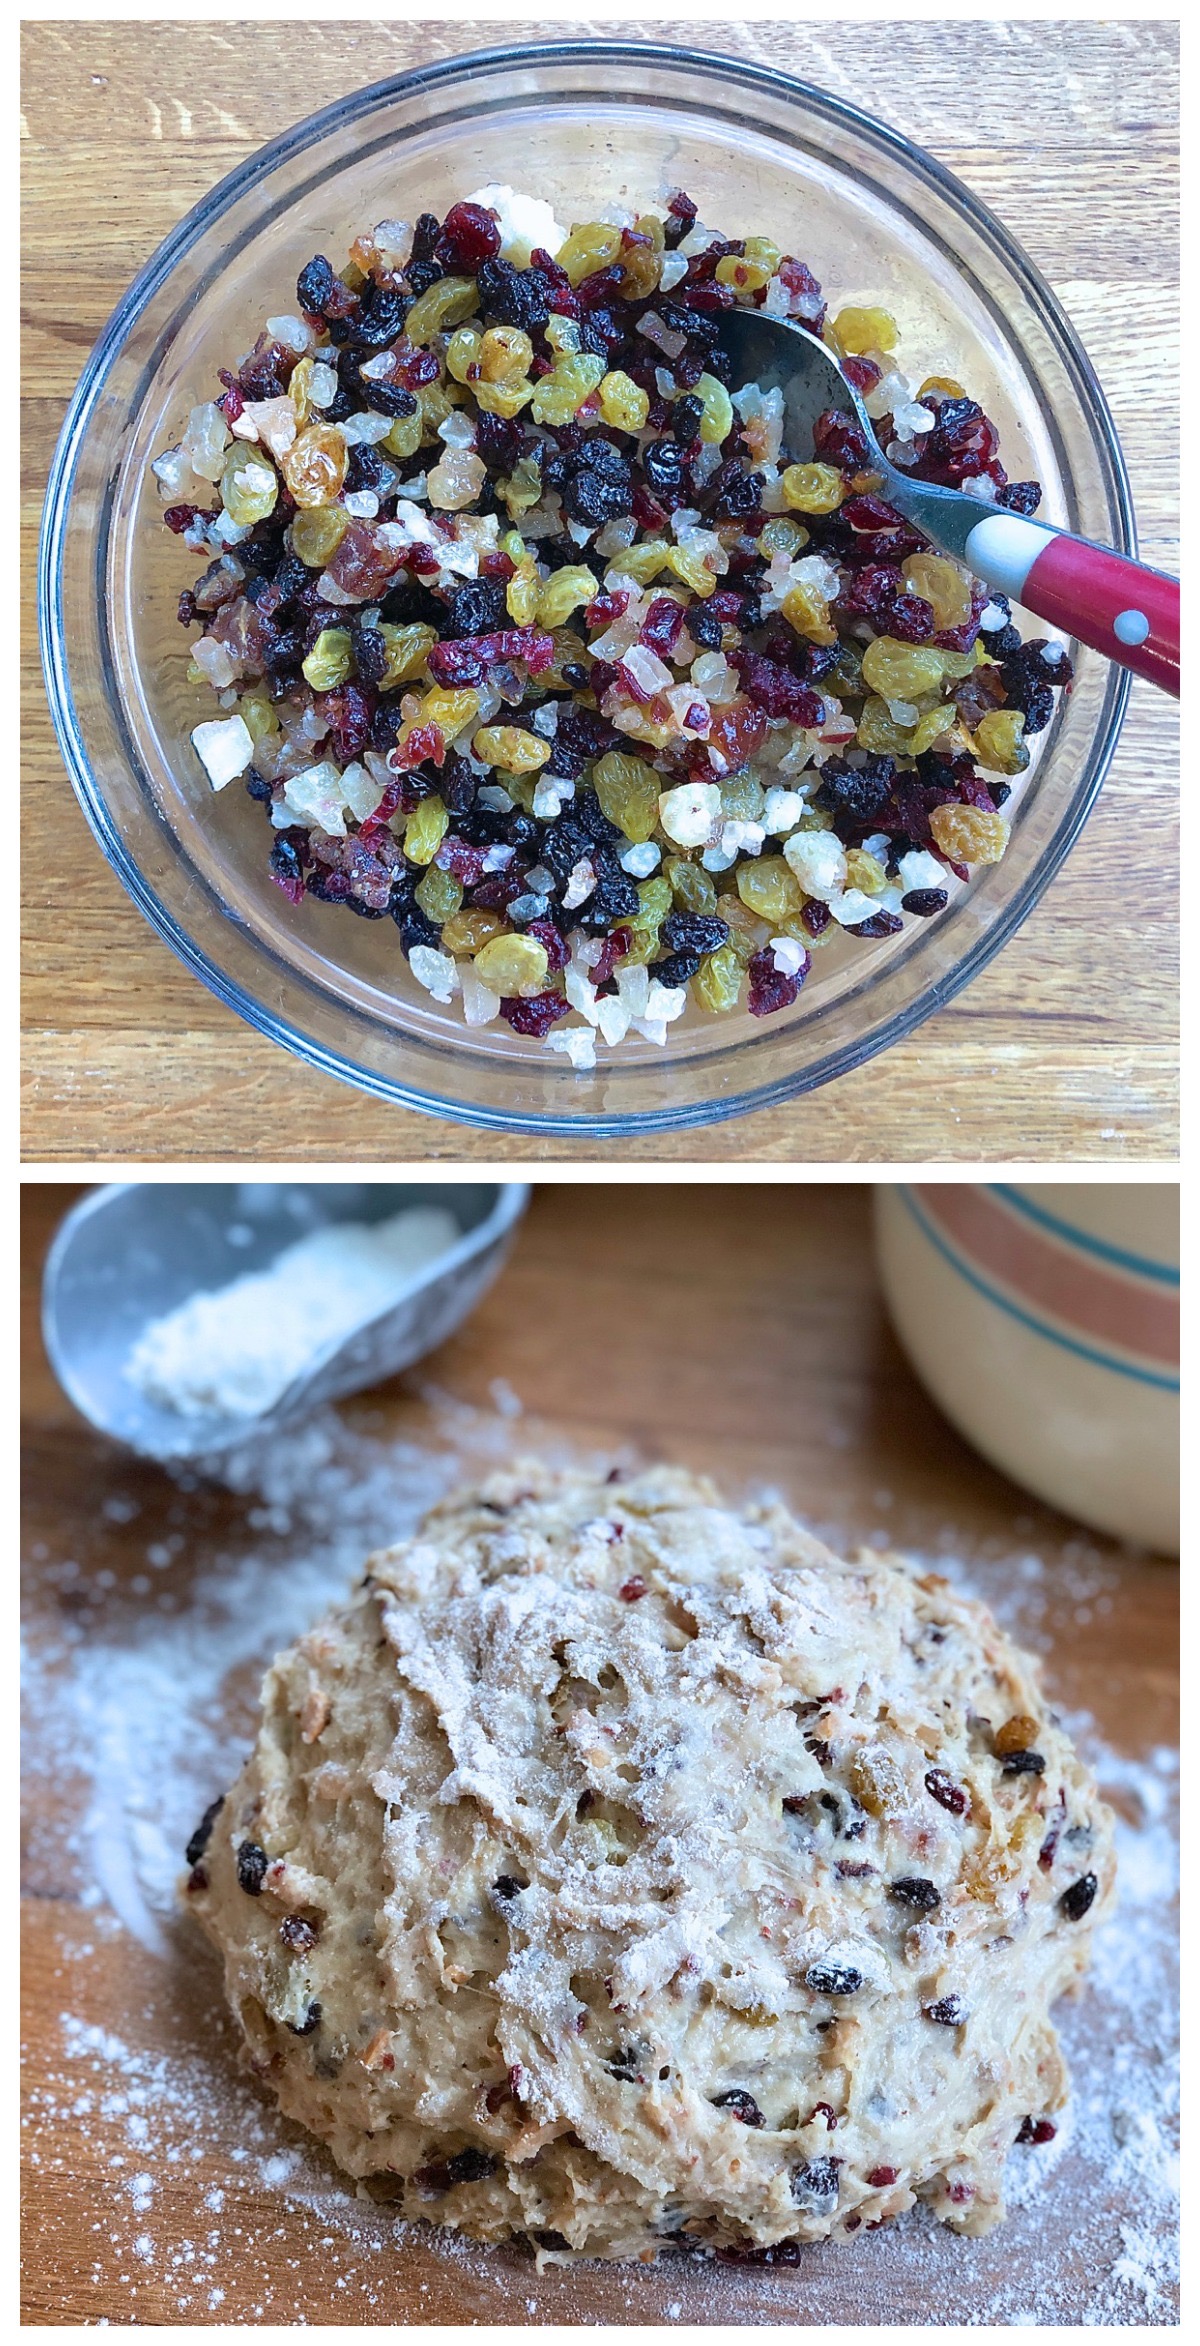 Two pictures: soaked dried fruit, ready to knead into stollen dough; stollen dough with fruit and nuts kneaded in.